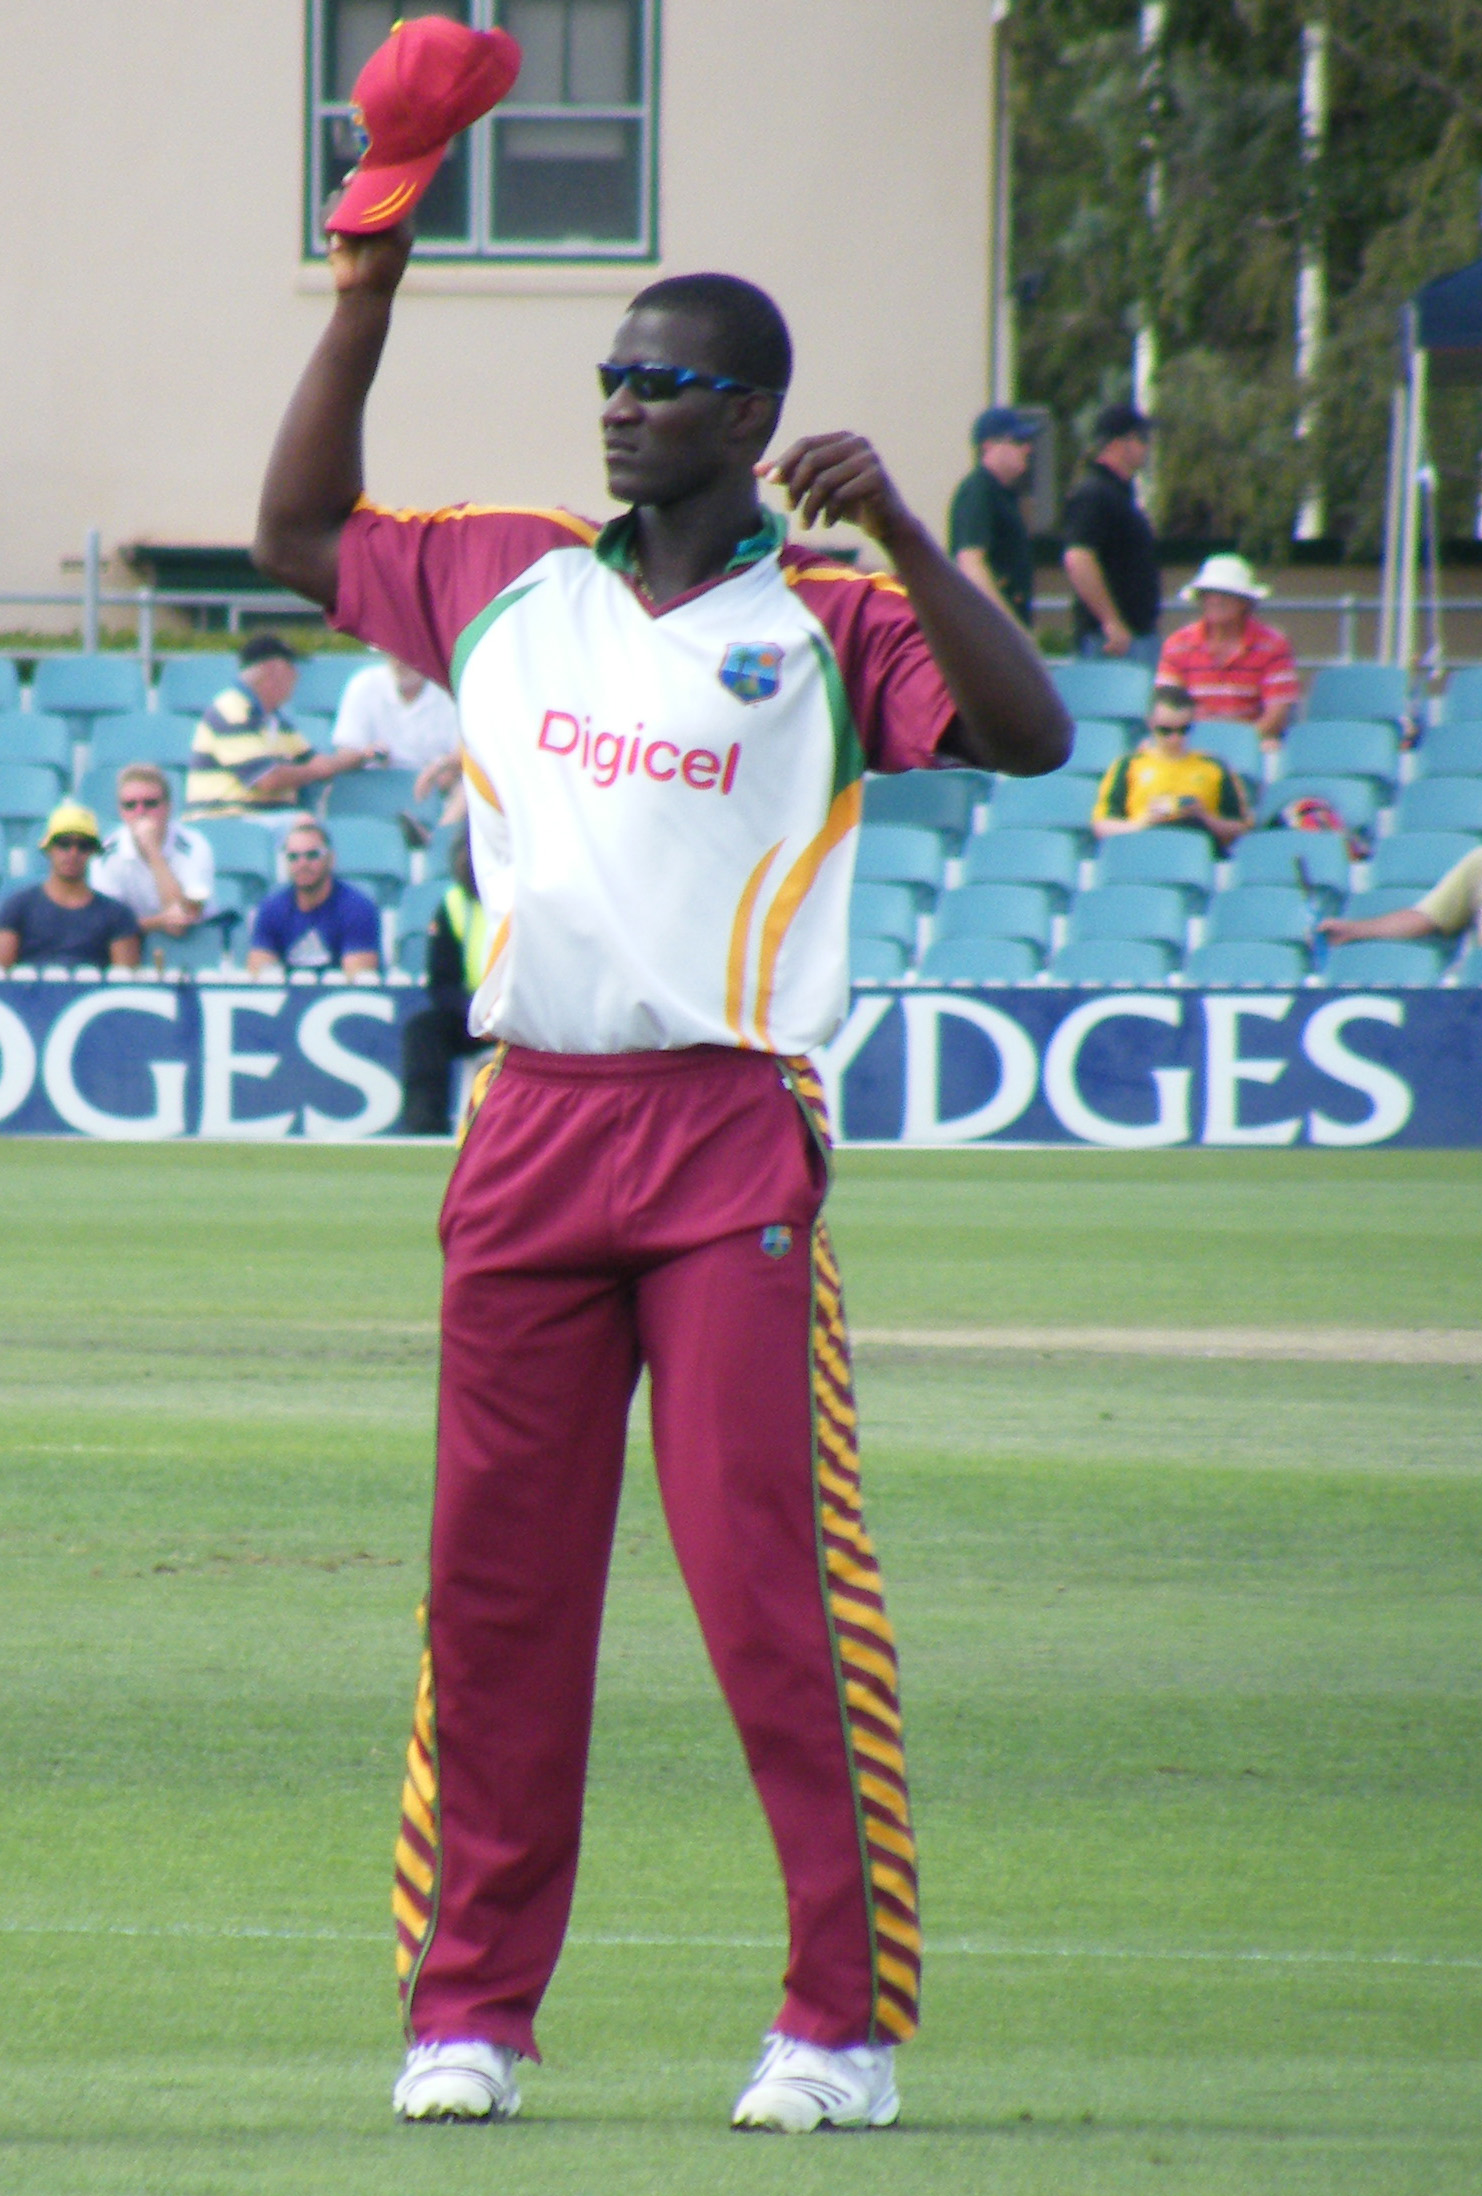 Russell hails happy West Indies